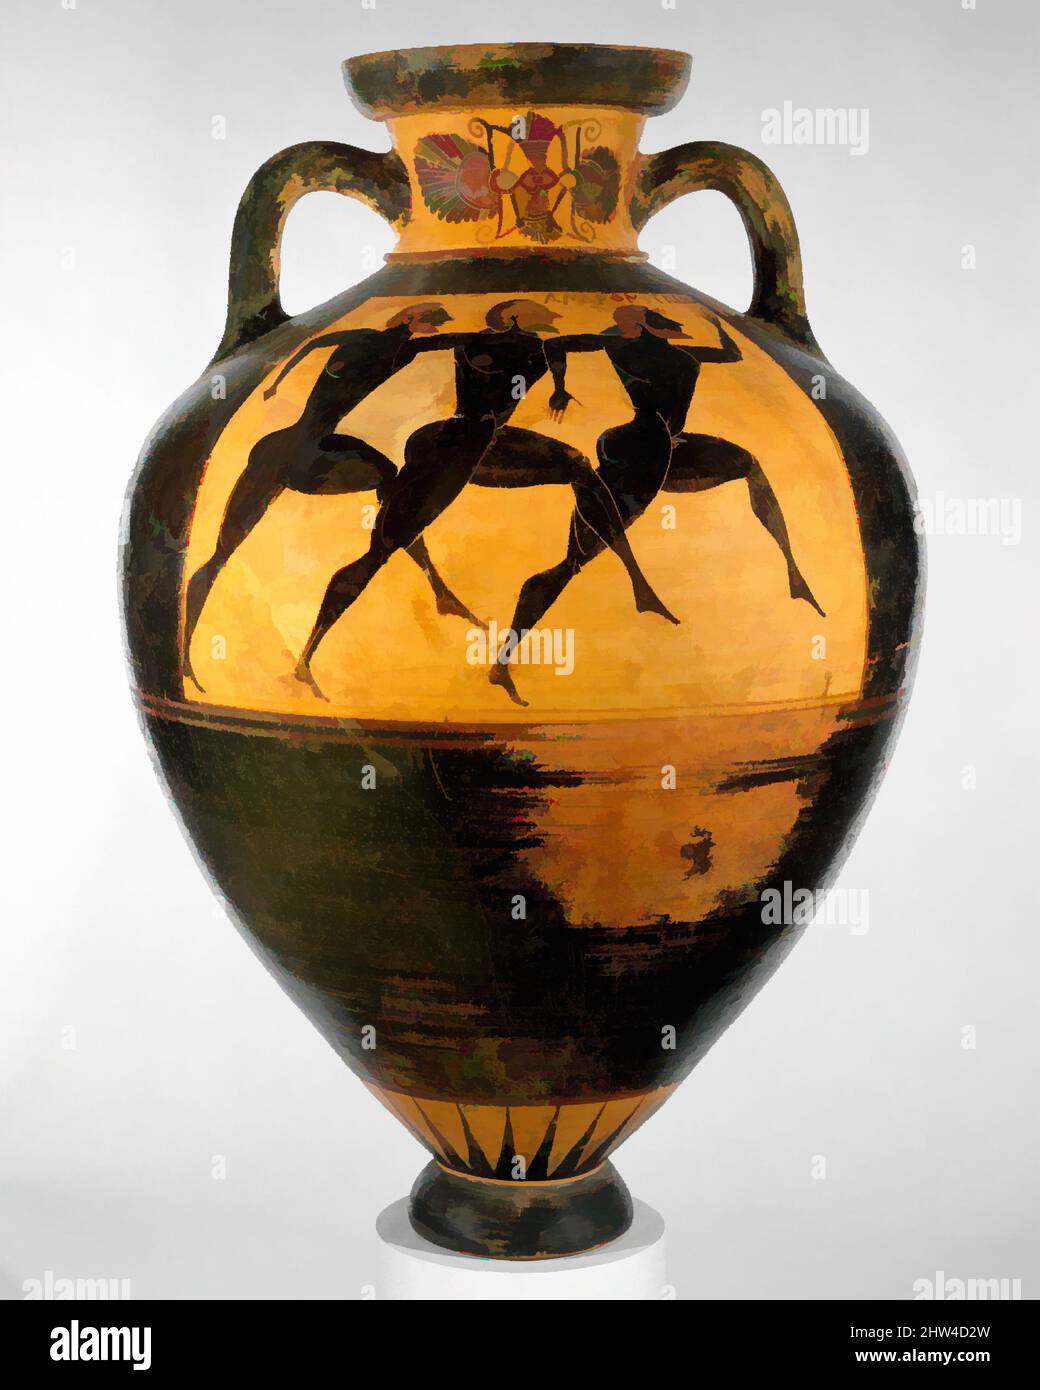 Art inspired by Terracotta Panathenaic prize amphora (jar), Archaic, ca. 560–550 B.C., Greek, Attic, Terracotta; black-figure, H. 24 5/16 in. (61.8 cm), Vases, Obverse, Athena, with this inscription: one of the prizes from Athens. Nikias made me, Reverse, footrace, with this, Classic works modernized by Artotop with a splash of modernity. Shapes, color and value, eye-catching visual impact on art. Emotions through freedom of artworks in a contemporary way. A timeless message pursuing a wildly creative new direction. Artists turning to the digital medium and creating the Artotop NFT Stock Photo